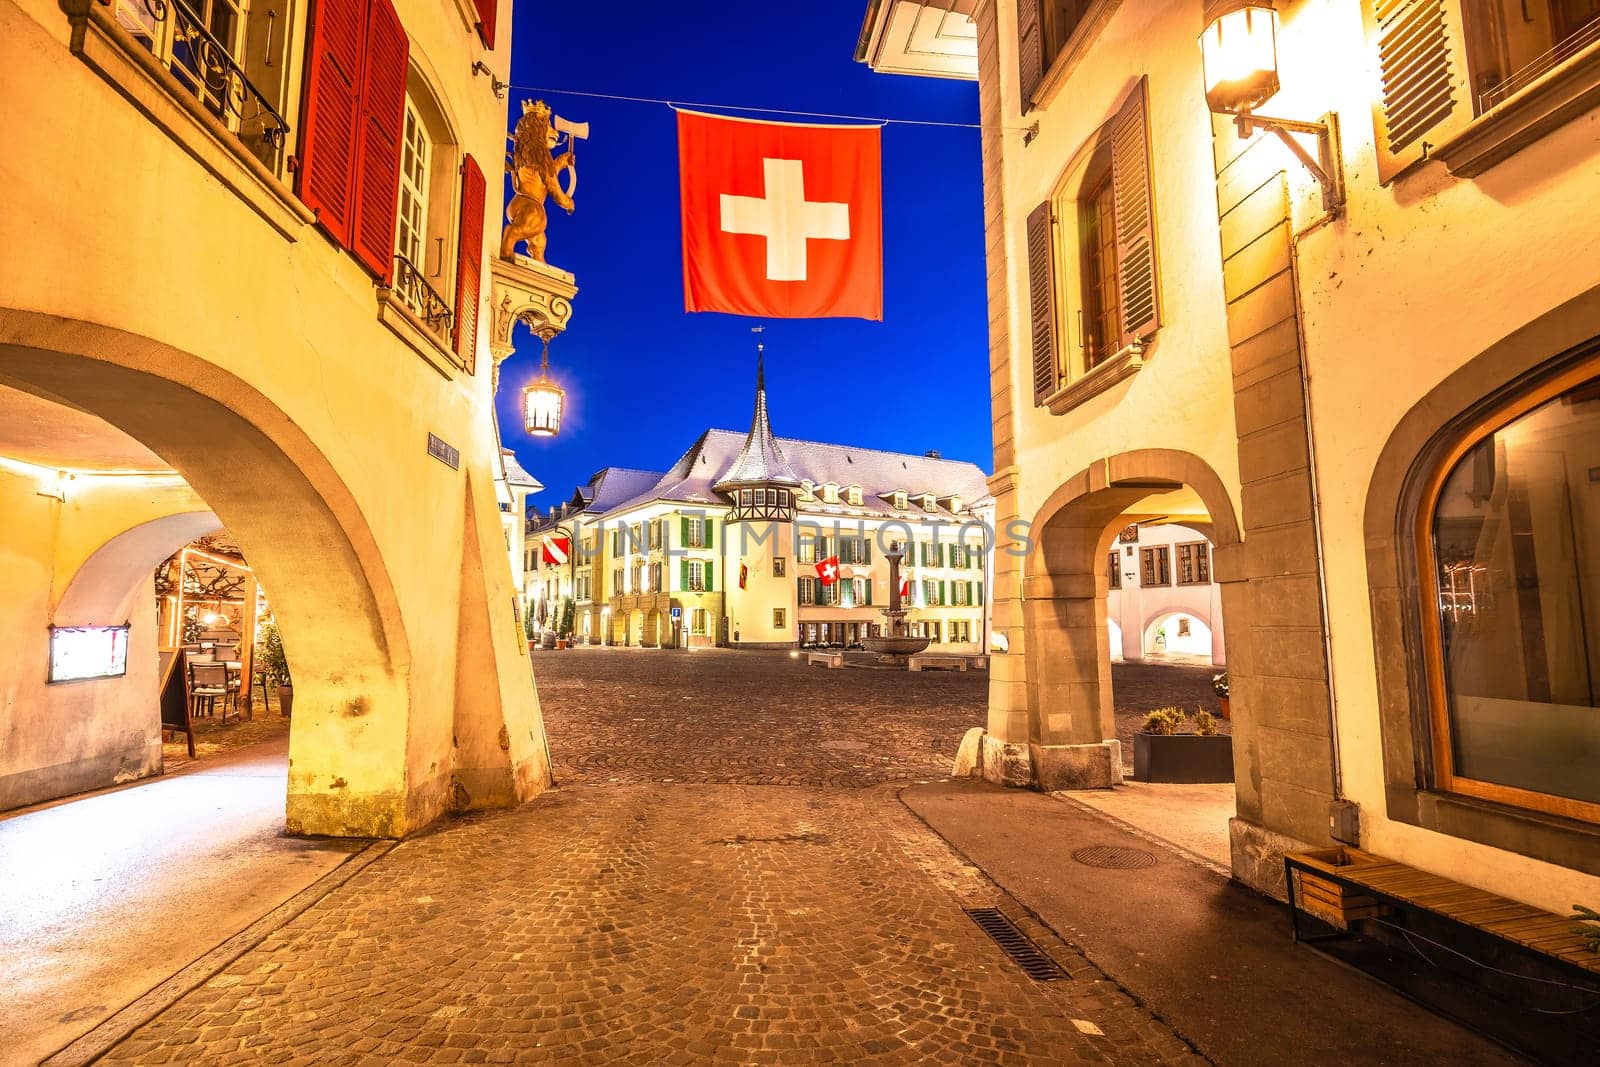 Town of Thun square and architecture evening view, Bern region of Switzerland